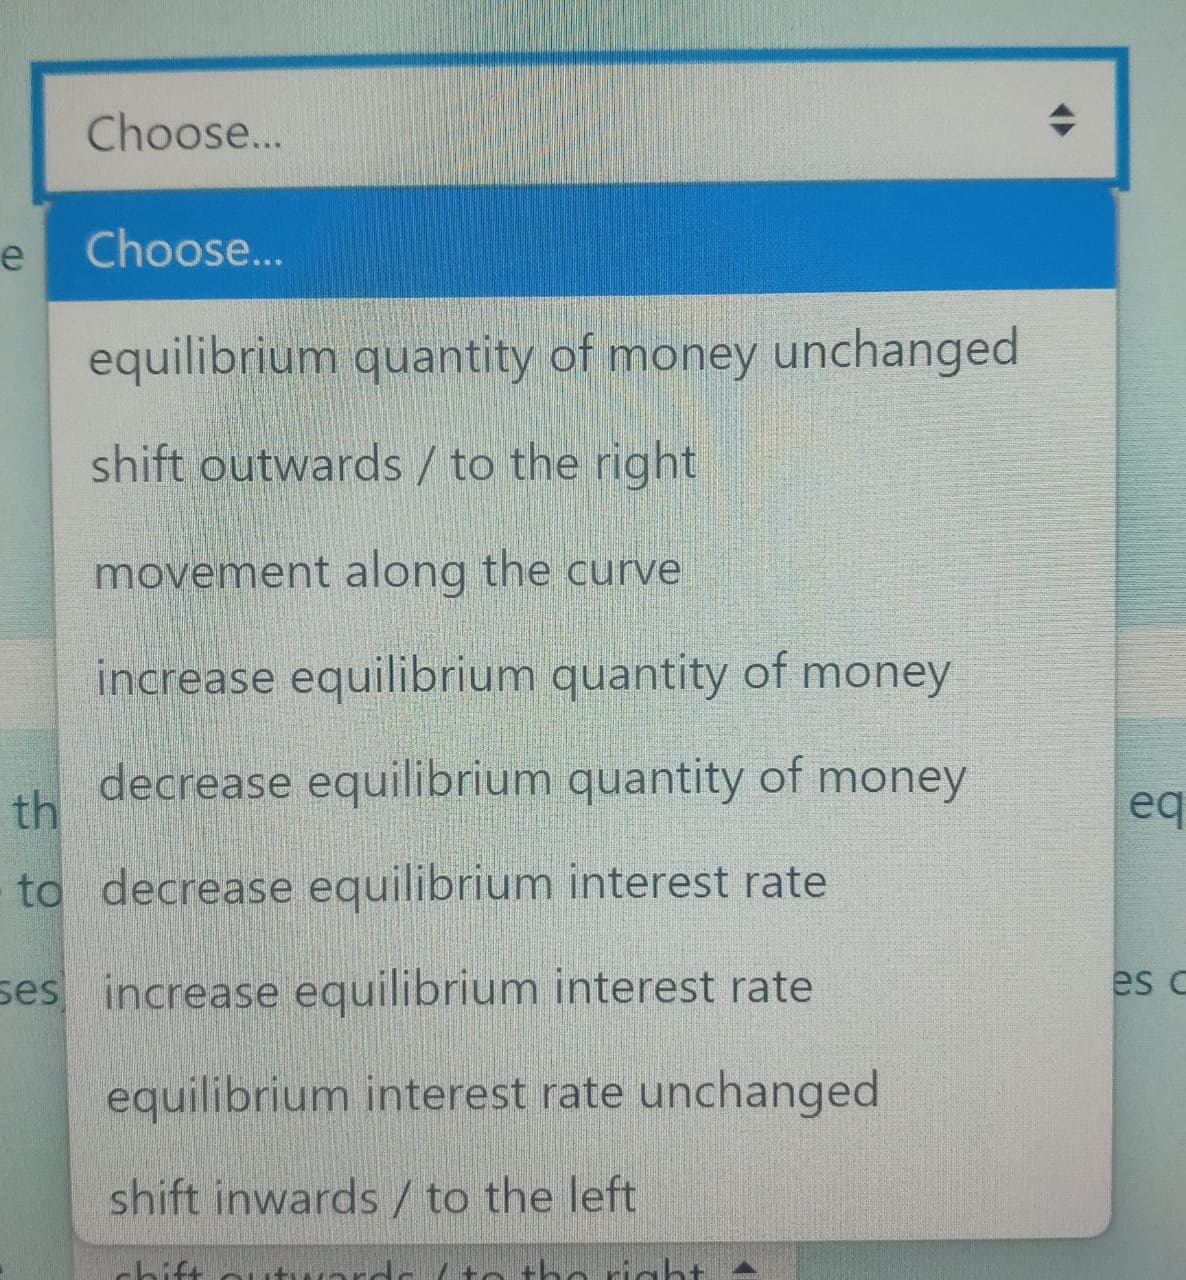 Choose...
e Choose...
equilibrium quantity of money unchanged
shift outwards / to the right
movement along the curve
increase equilibrium quantity of money
decrease equilibrium quantity of money
th
to decrease equilibrium interest rate
ses increase equilibrium interest rate
equilibrium interest rate unchanged
shift inwards / to the left
shift-
to the right-
+
eq
es c